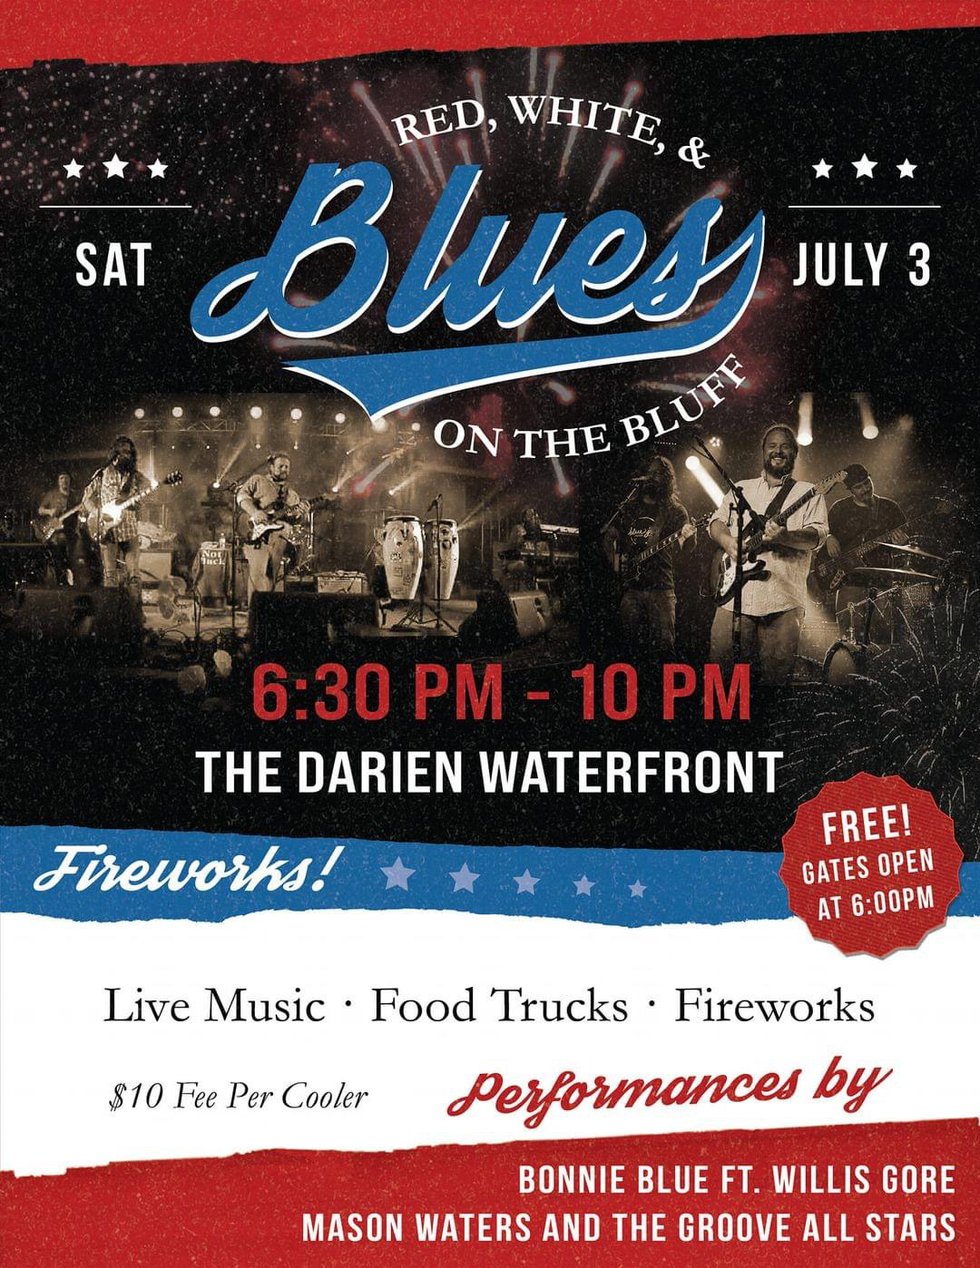 Red White Blues on the Bluff 2021 updated poster